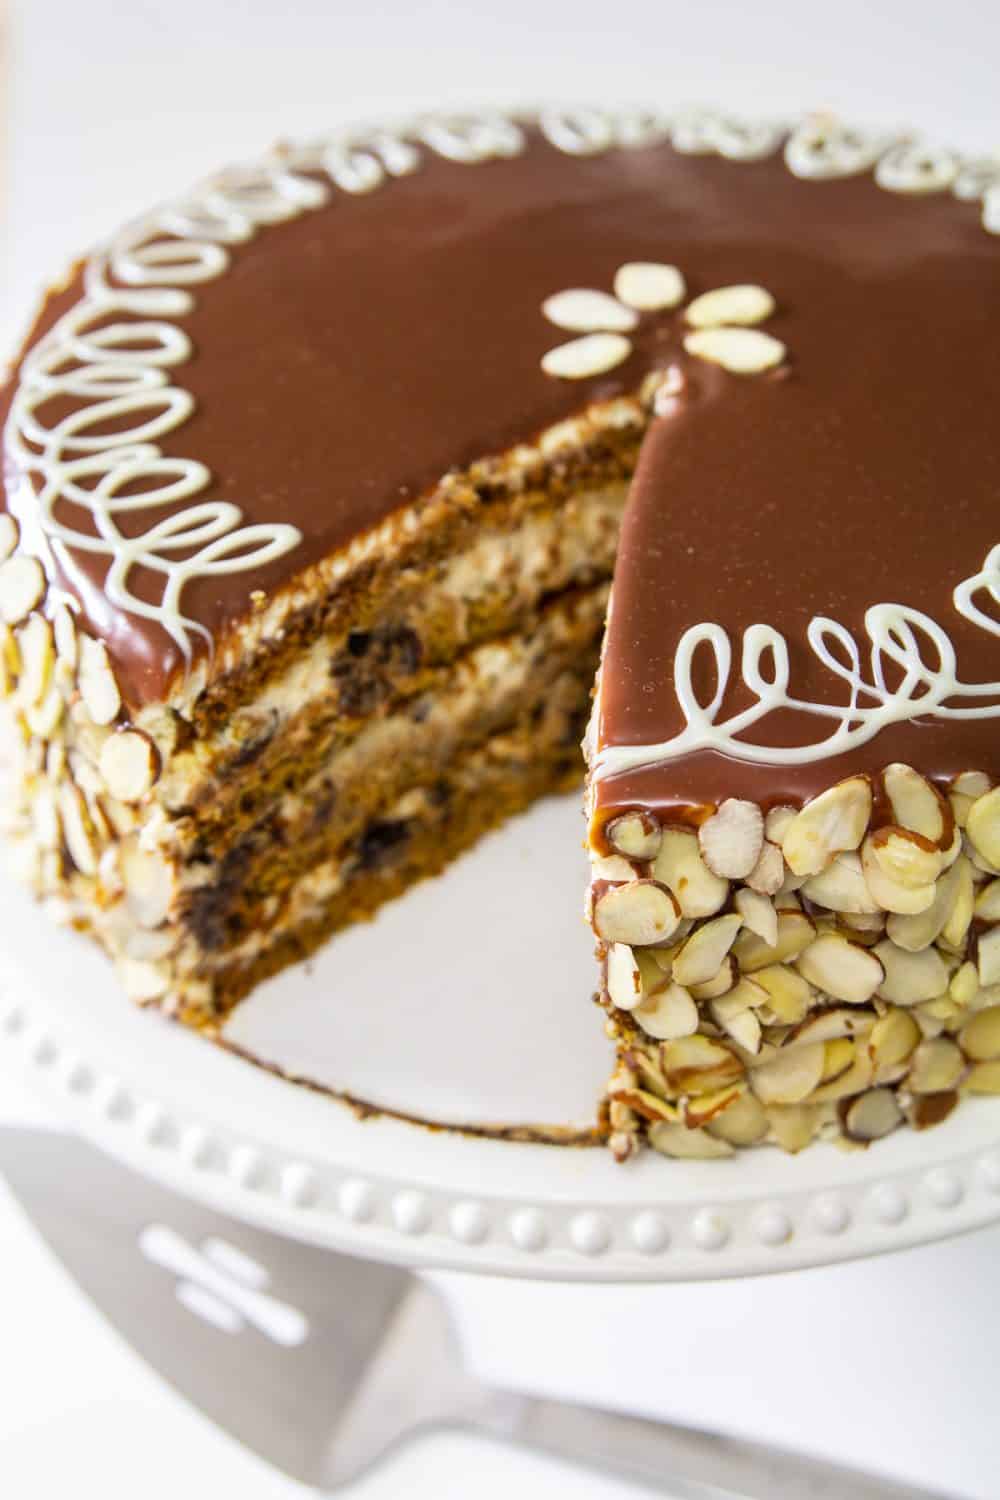 Poppy Seed Honey Cake covered in chocolate ganache and sliced almonds, with one slice cut out on a white plate and white background.